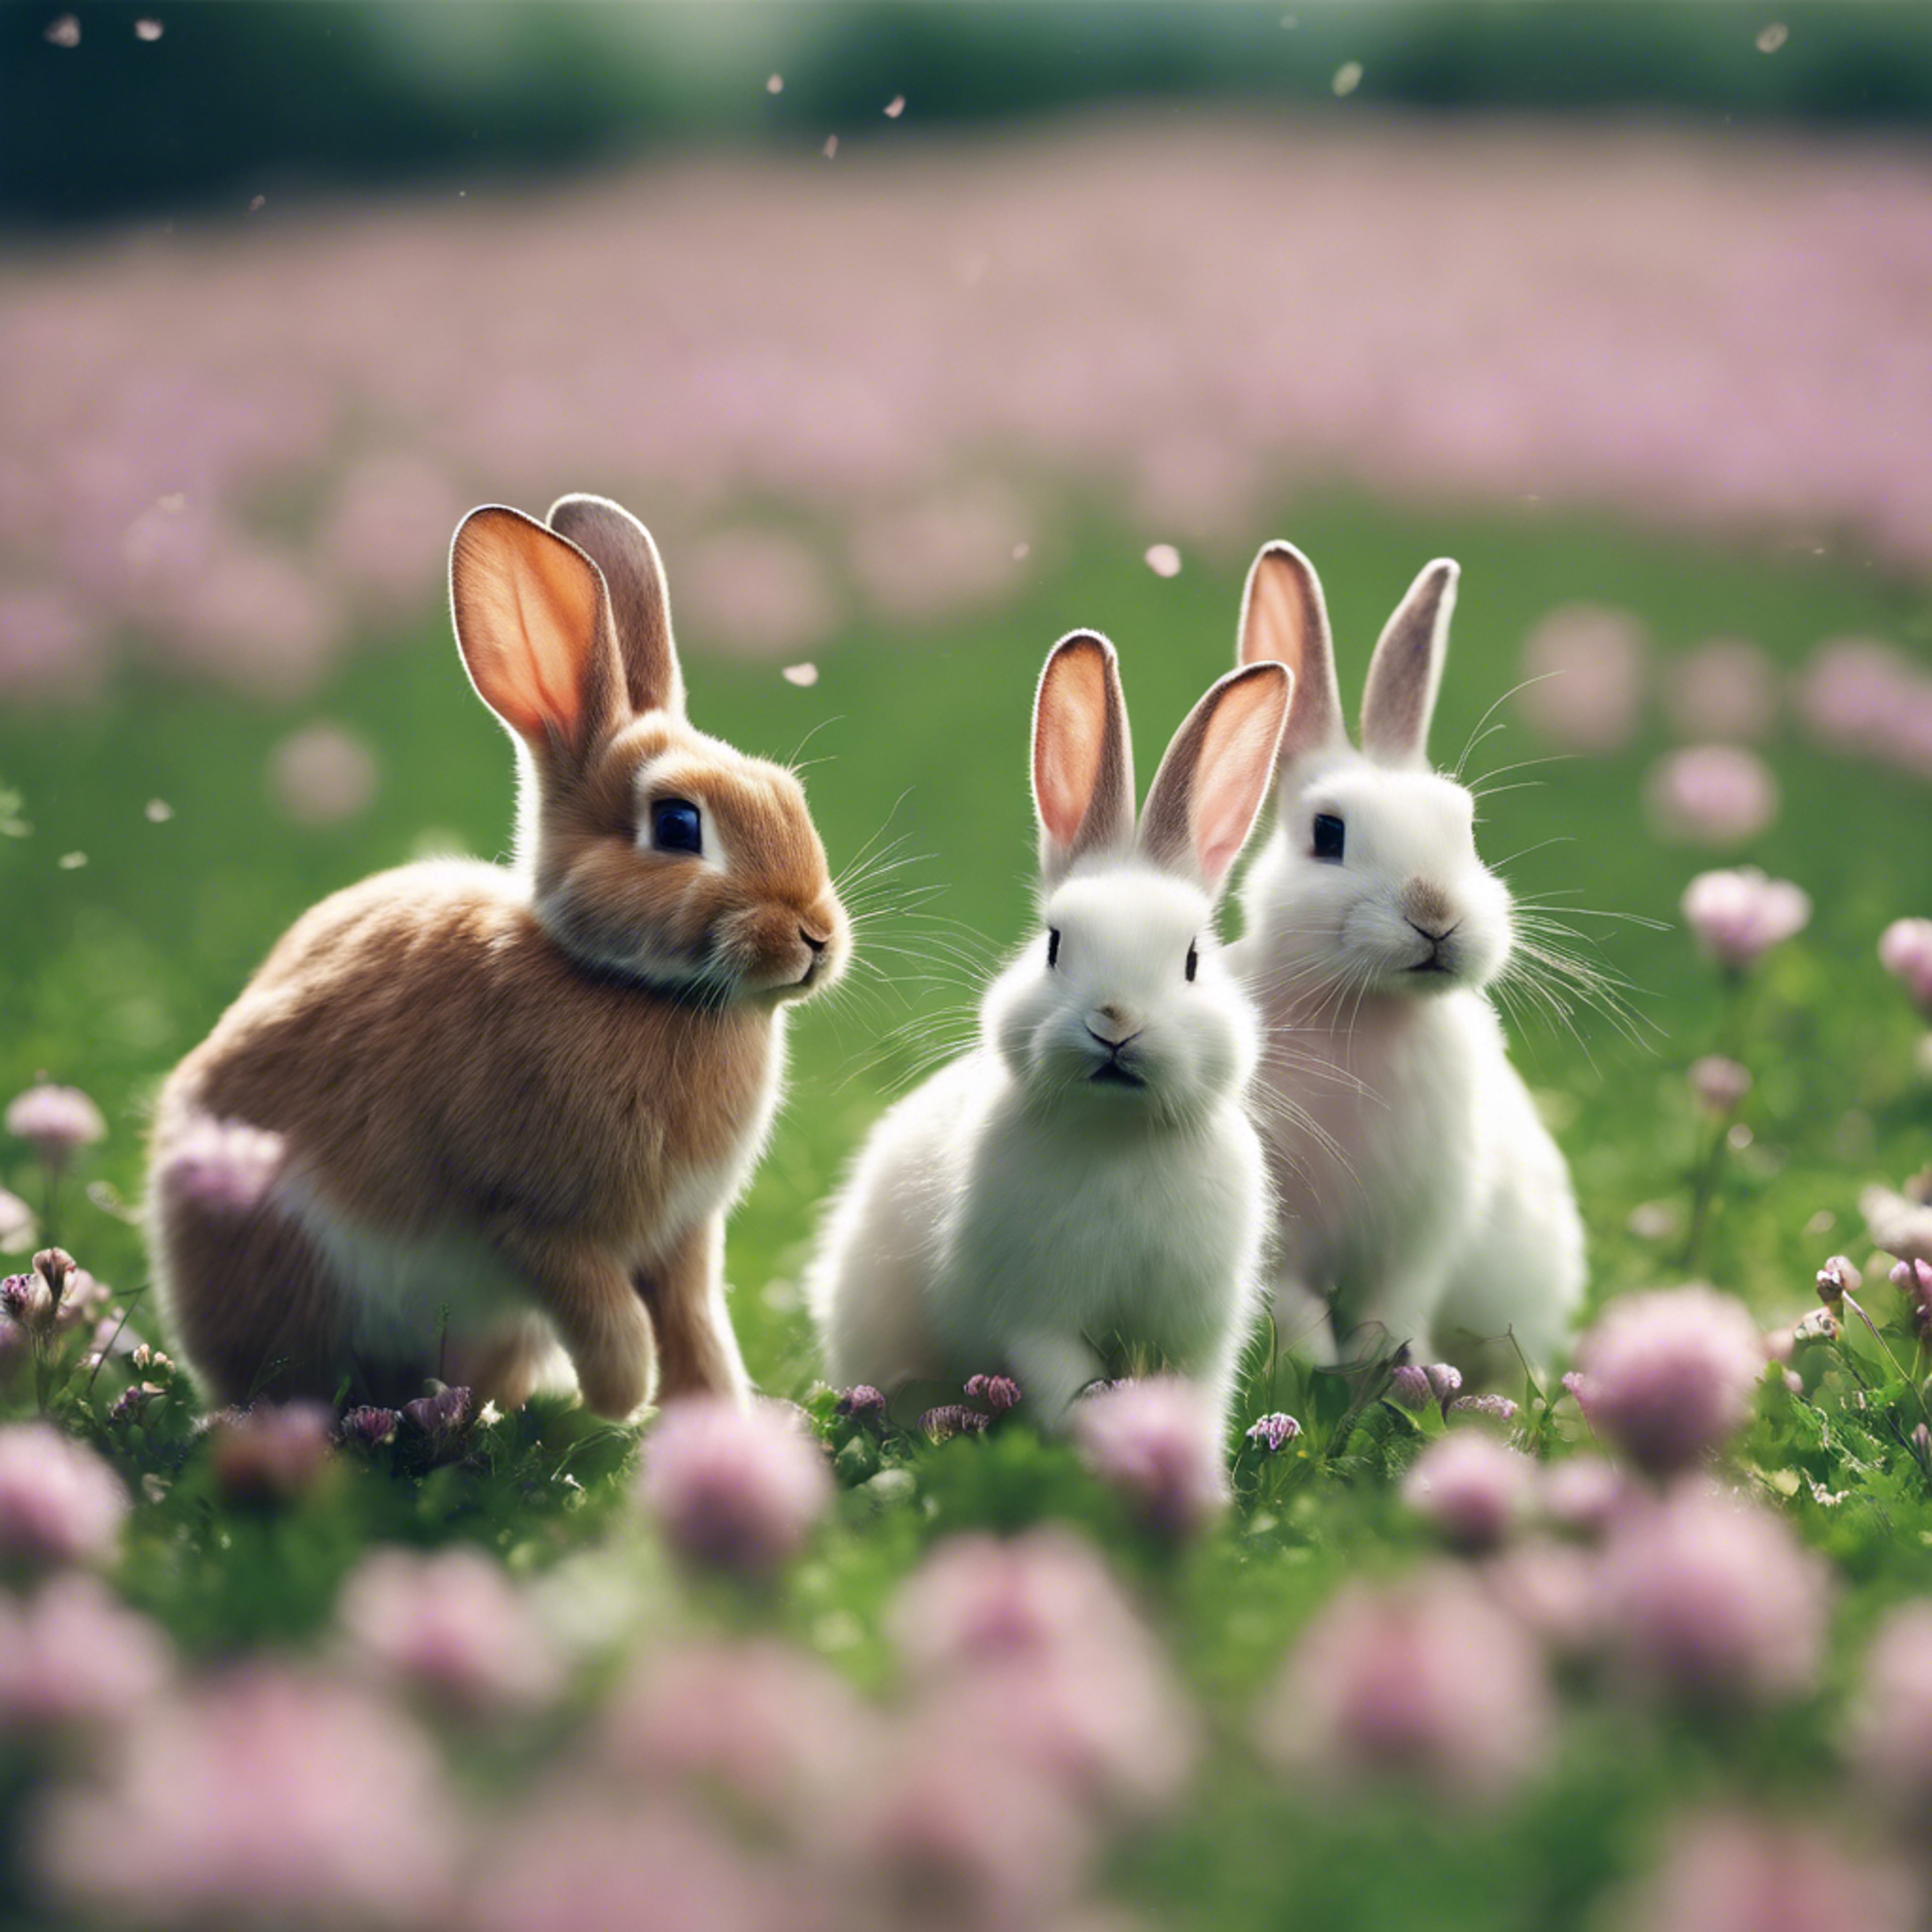 A group of rabbits playing tag in a clover field. วอลล์เปเปอร์[610eb32603614430a4af]